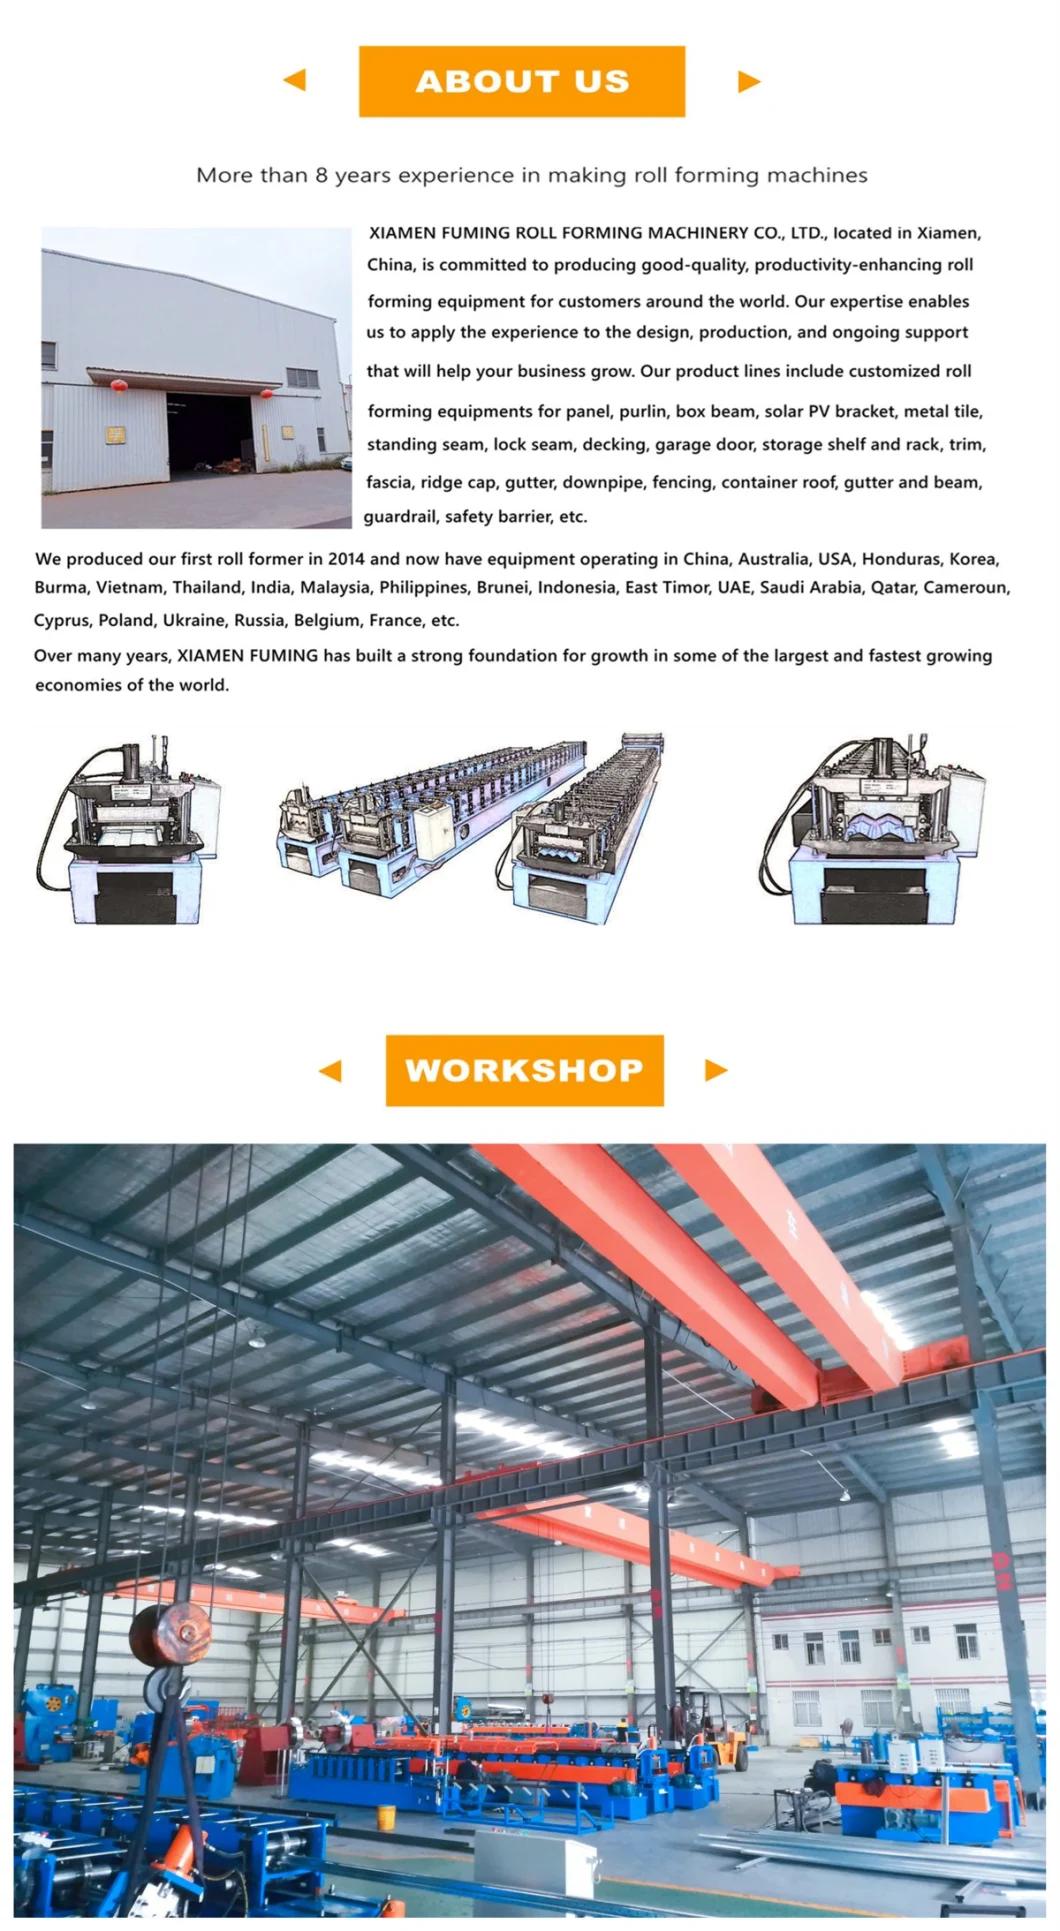 New Gi, Cold Rolled Steel Ibr Roof Sheet Forming Machine Track Section